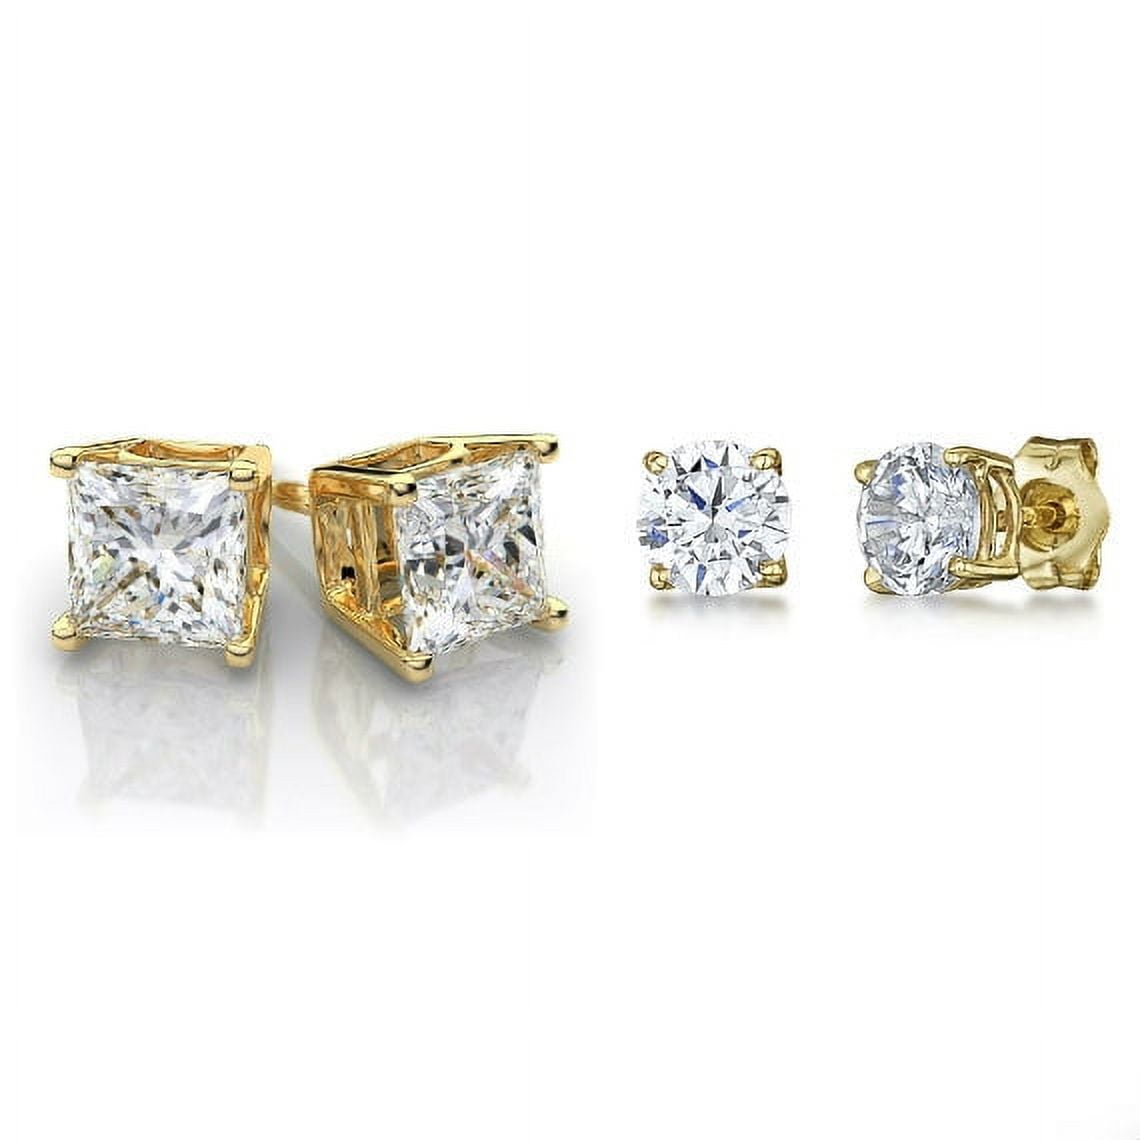 18K Gold CZ Zircon Square Stud Earrings Unisex Hip Hop Hip Hop Jewelry, 0.7  1.6cm Width, Iced Out Diamonds For Punk Rock And Rapper Style Perfect Gift  From Guozhuwu, $9.9 | DHgate.Com